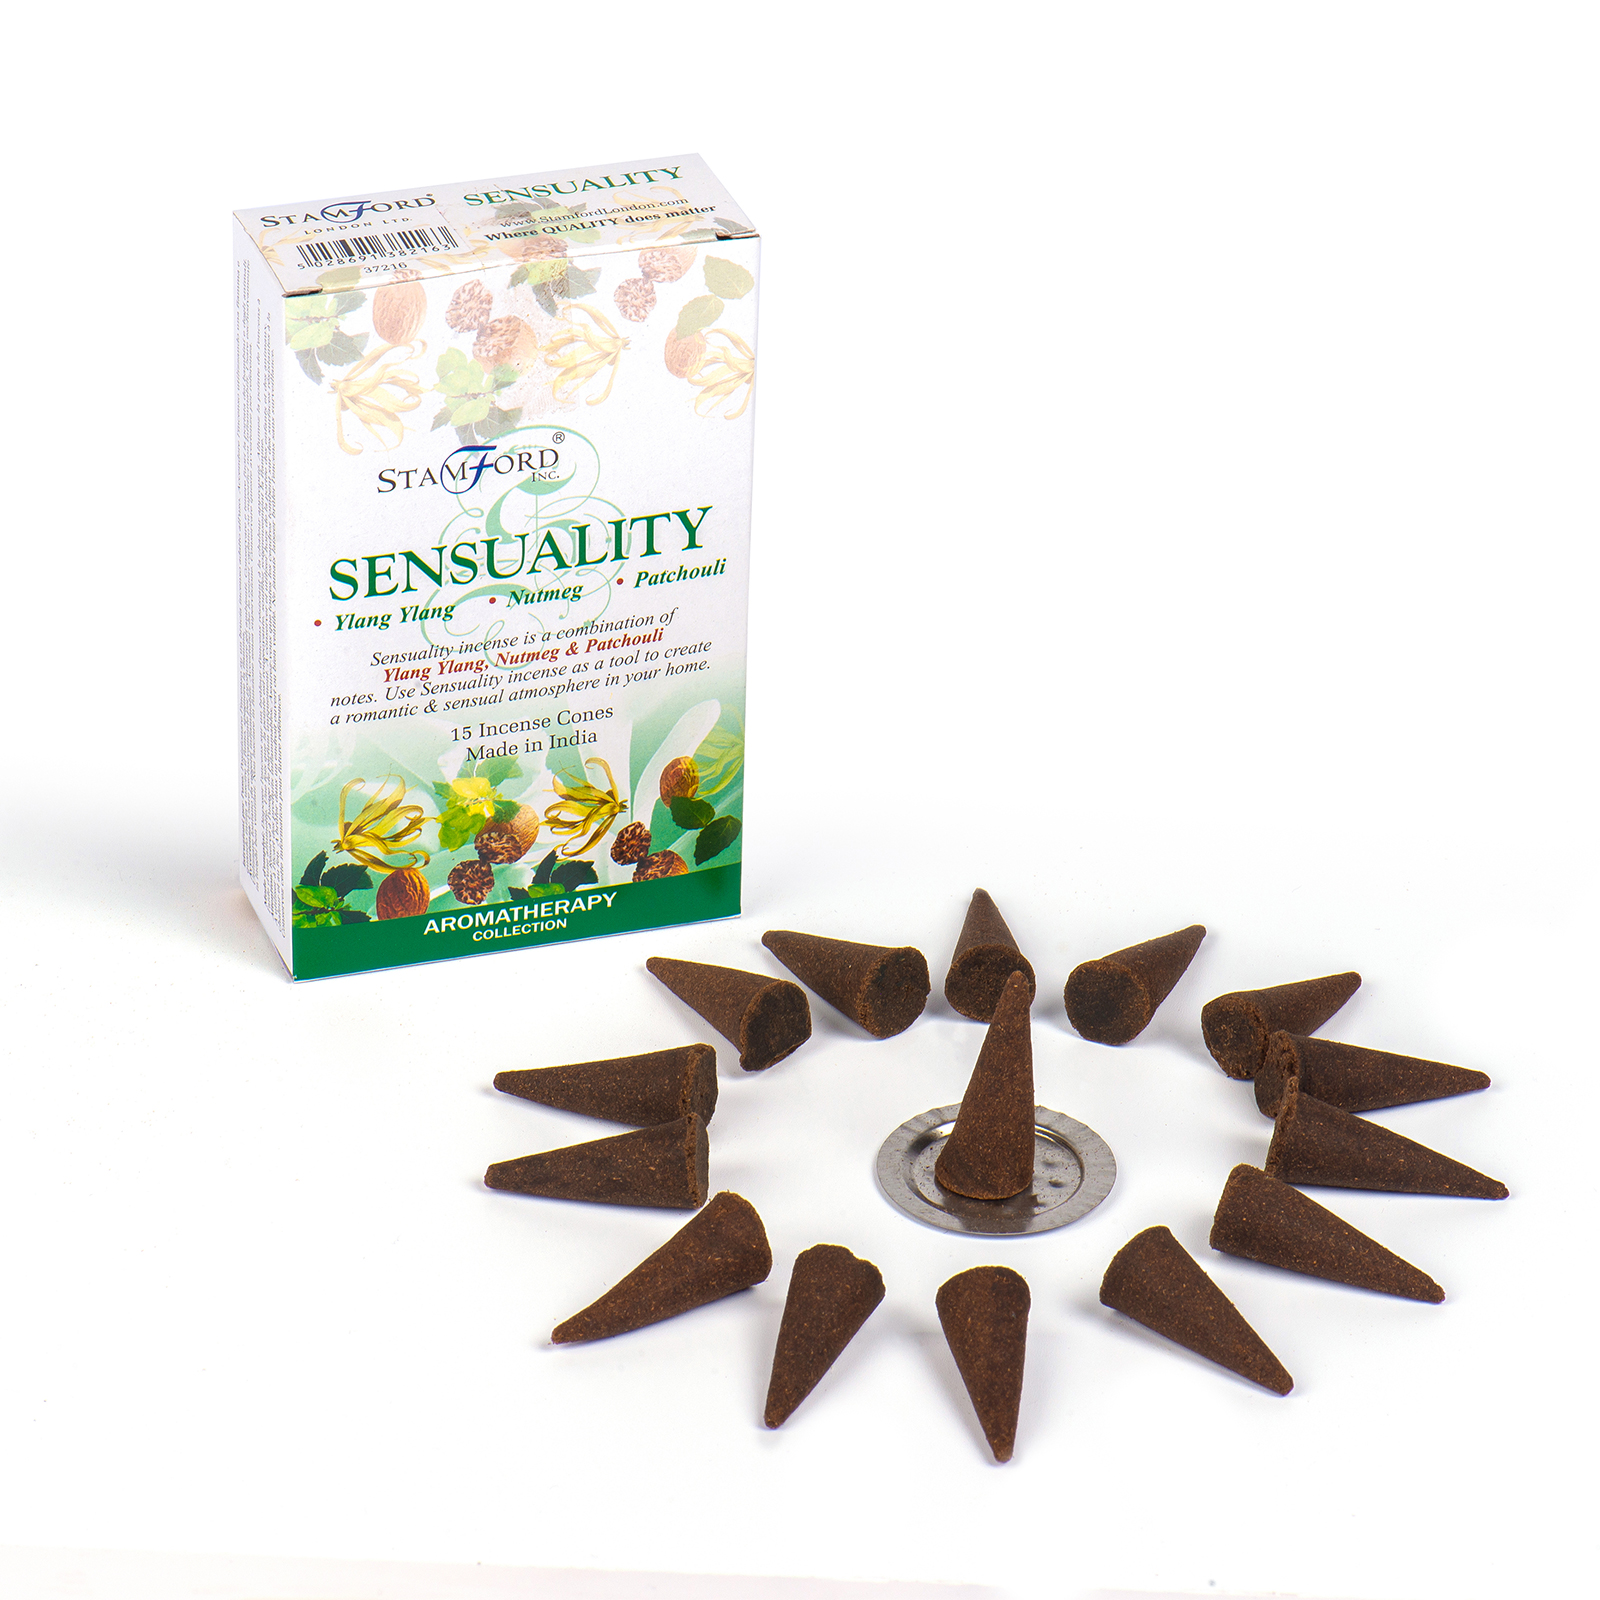 Sensuality Stamford Incense Cones and Metal Holder